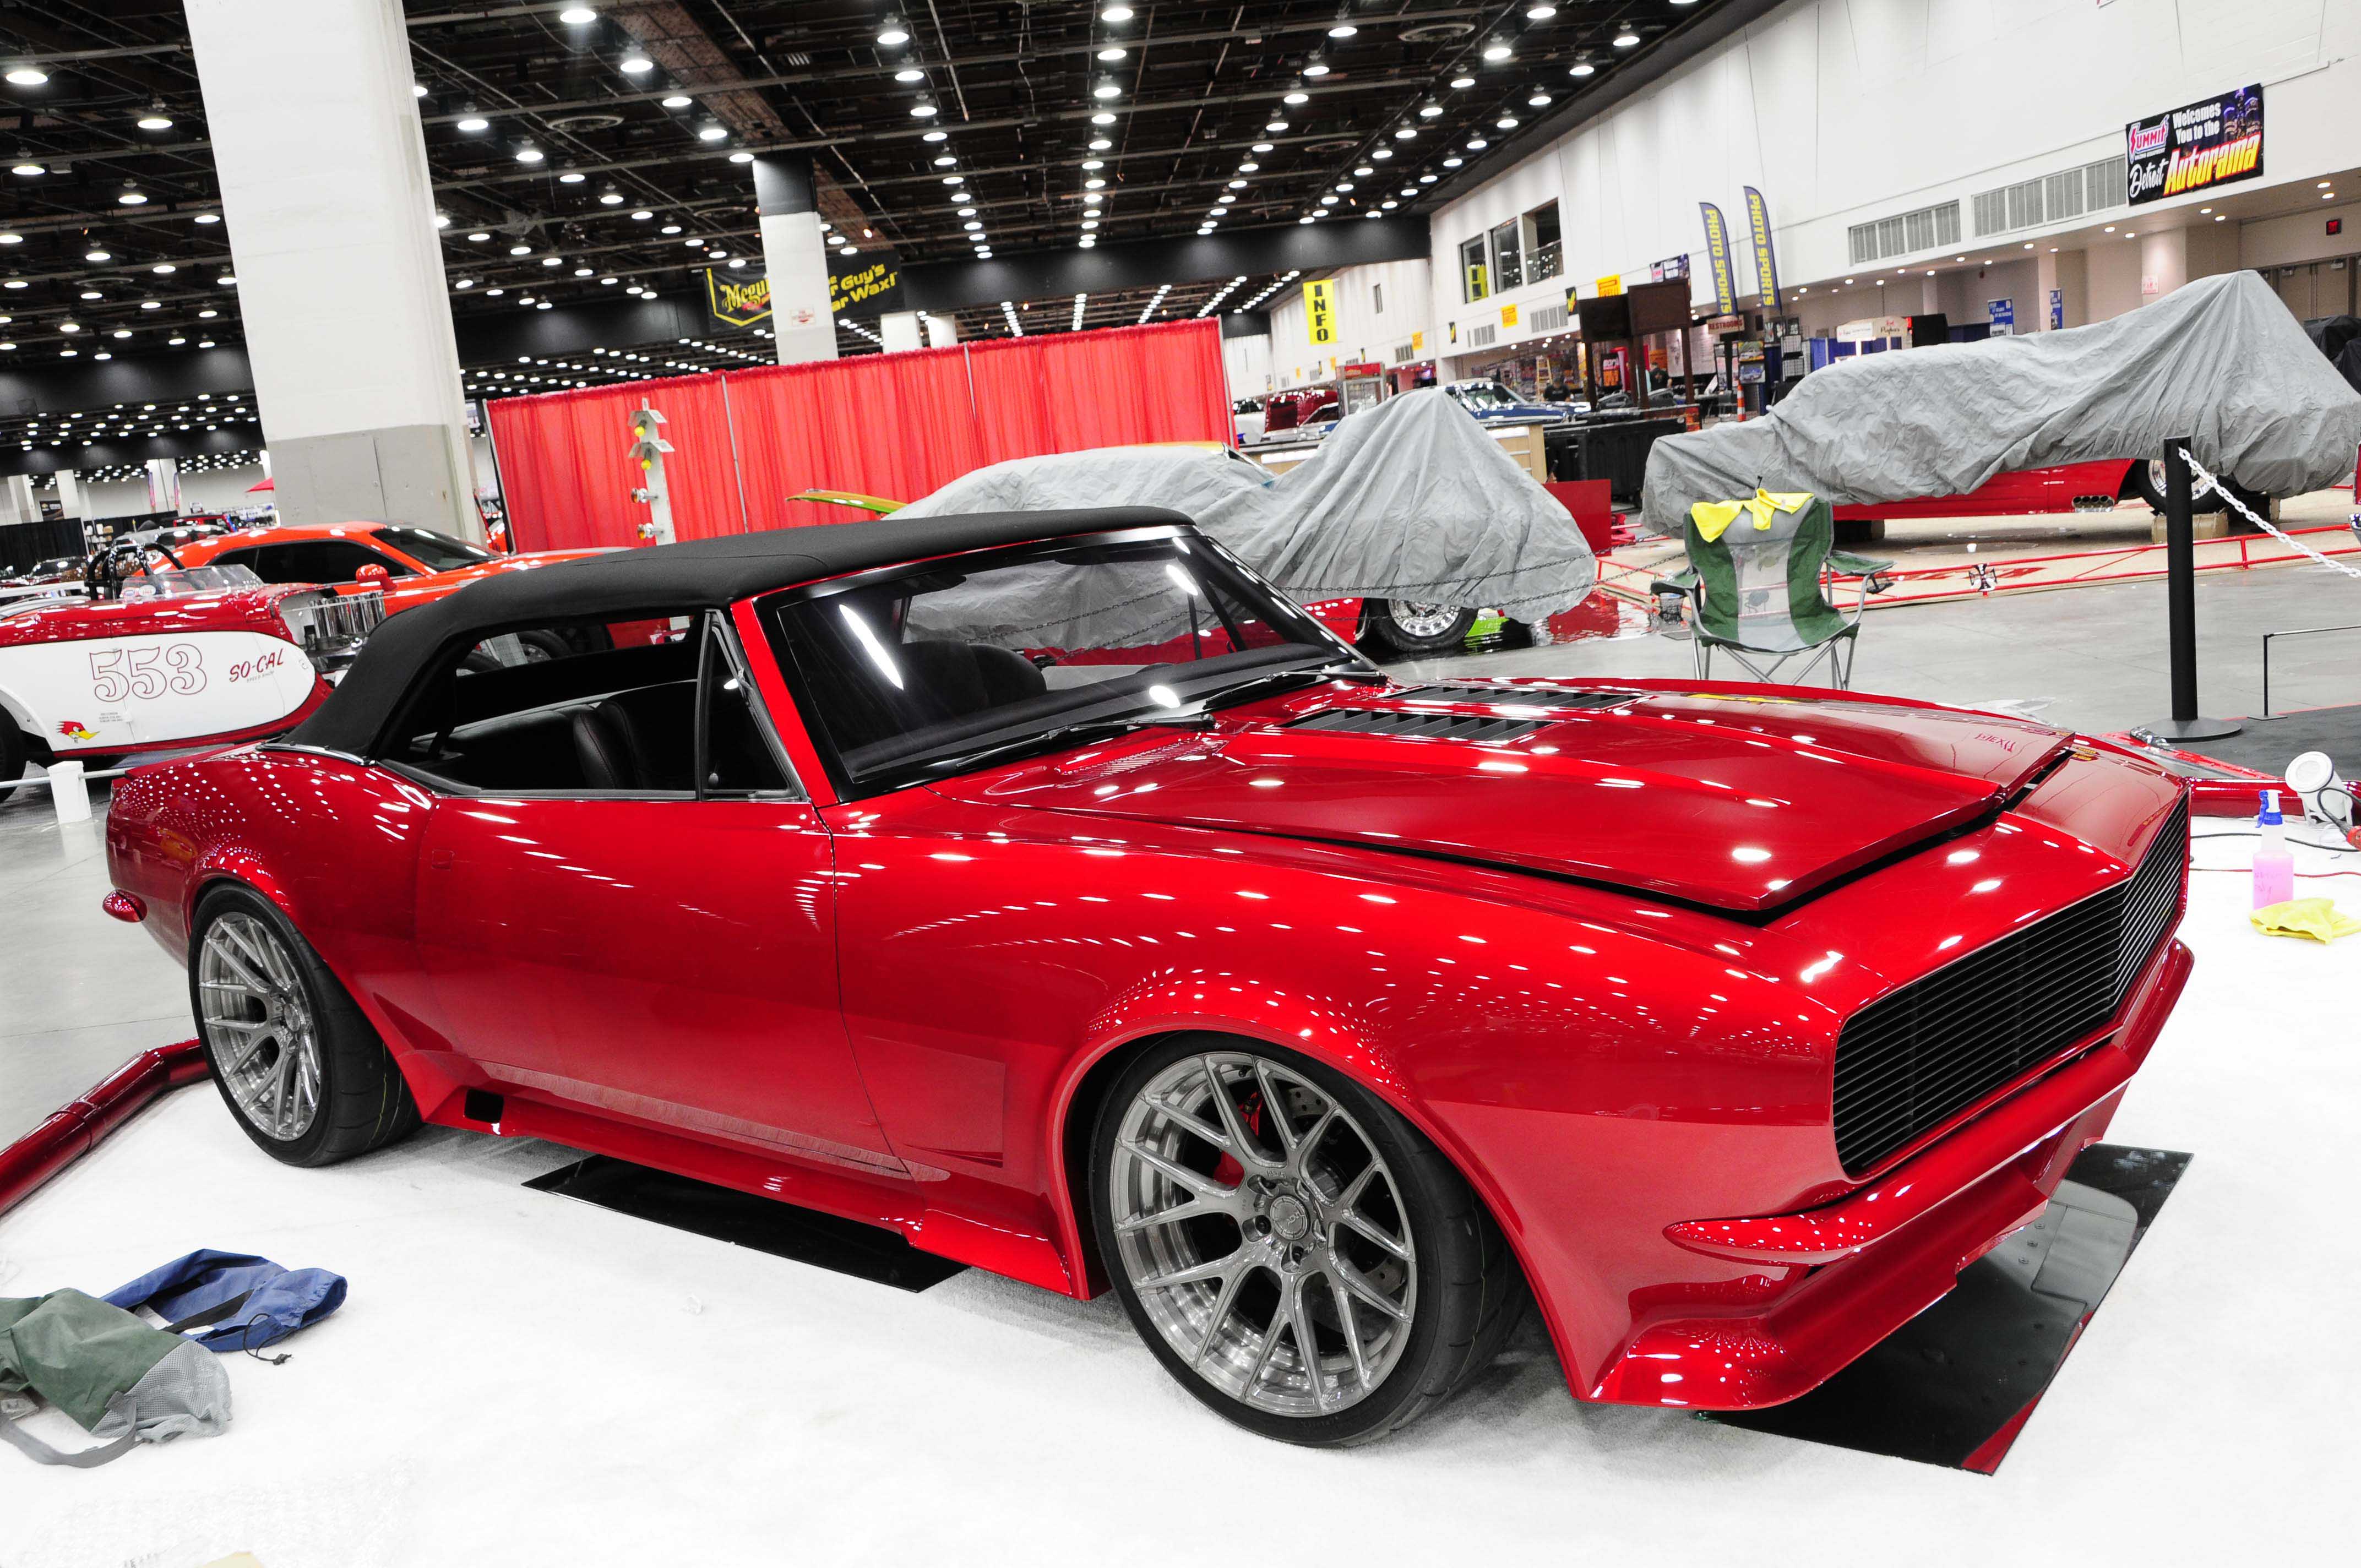 Chevys of the 2018 Detroit Autorama: All of them! - Hot Rod Network